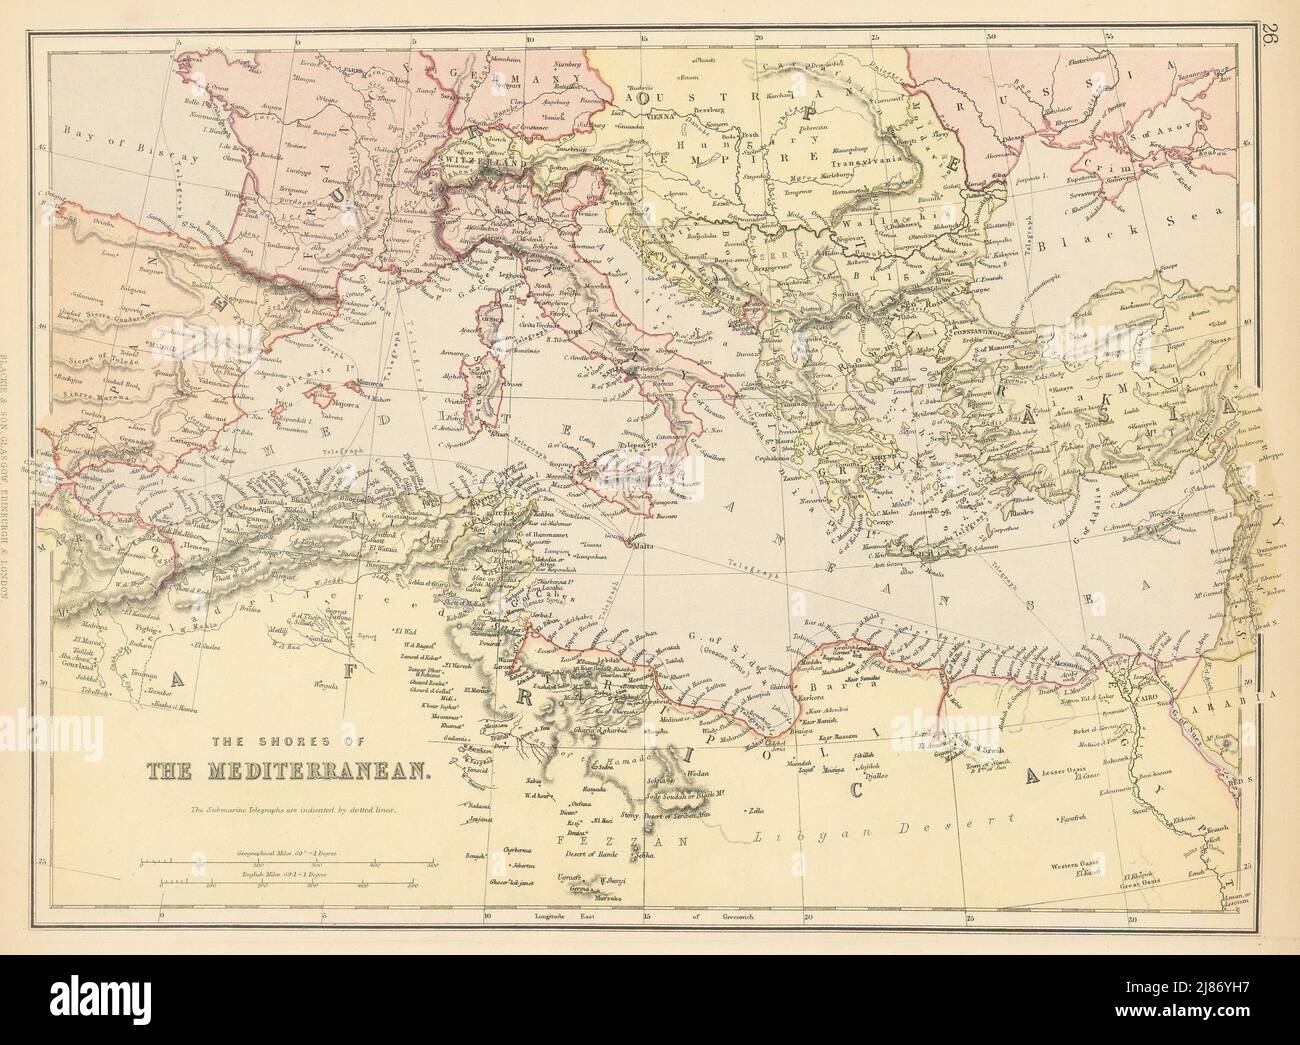 MEDITERRANEAN. Showing Telegraph cables. BLACKIE 1886 old antique map chart Stock Photo